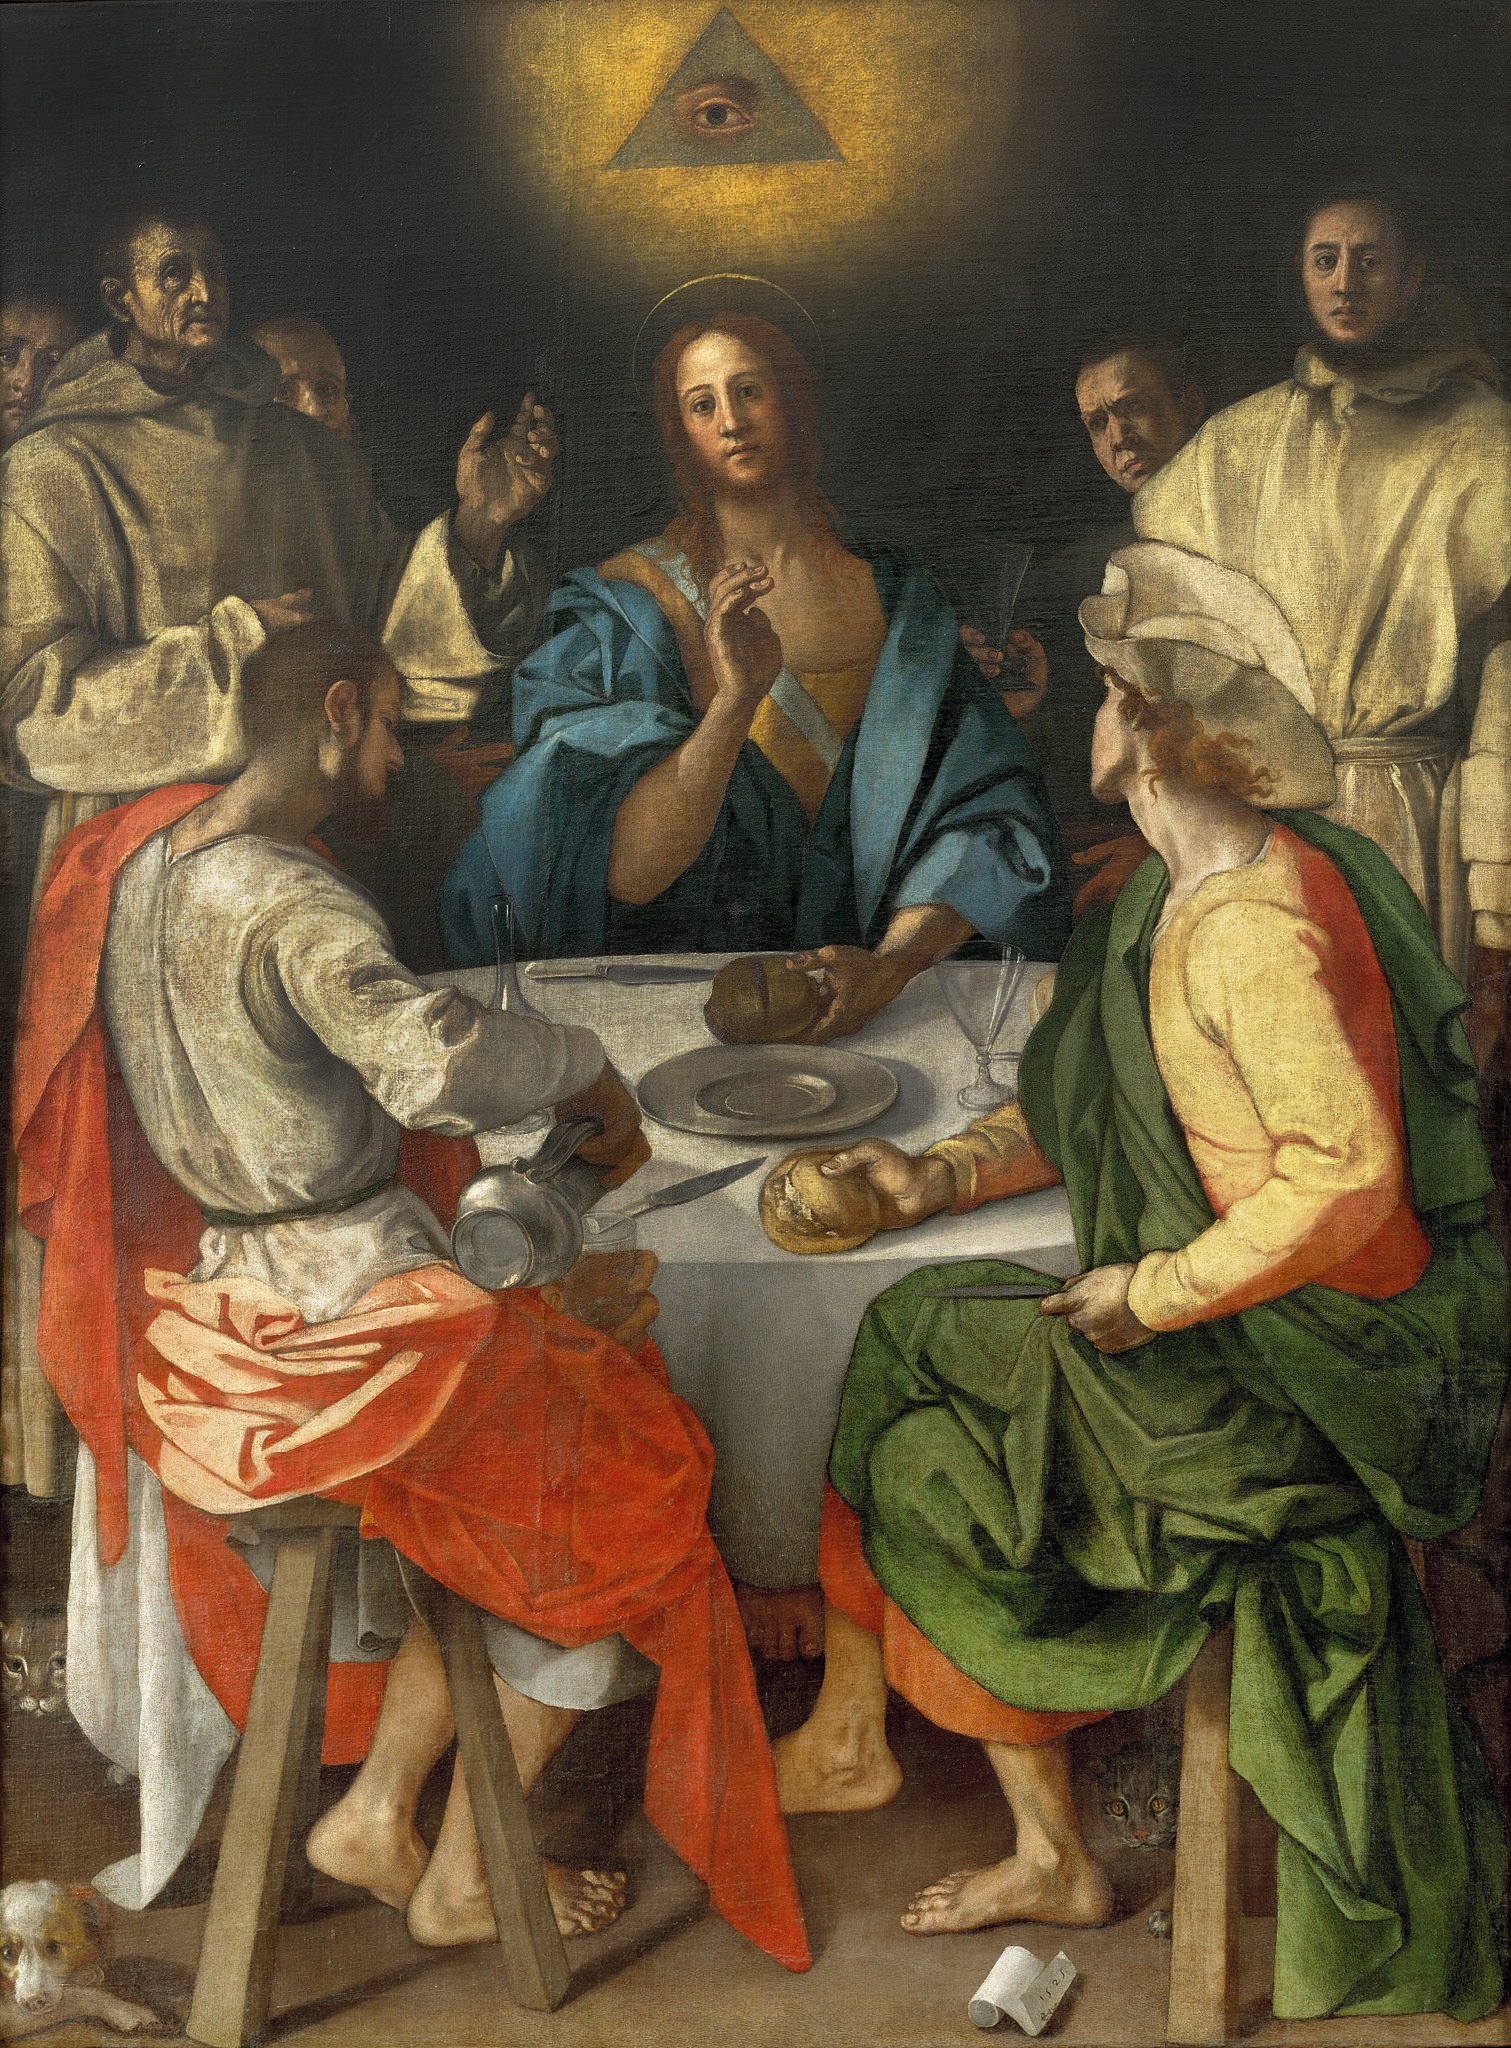 The painting shows a scene from the Bible, where Jesus reveals himself to two of his disciples after his resurrection. The painting is in a dark and somber tone, with a bright light coming from a window on the left. The light illuminates the face of Jesus, who is sitting at the center of a table, holding a piece of bread in his hands. He is wearing a blue robe and a red cloak, and has a halo around his head. He is looking at the viewer with a calm and serene expression. On his right, there is a man wearing a yellow robe and a green hat, who is leaning forward with his hands on the table. He is one of the disciples, named Cleopas, and he seems surprised and amazed by Jesus’ appearance. On his left, there is another man wearing a brown robe and a large hat with three points. He is the other disciple, named Luke, and he is looking at Jesus with curiosity and awe. Behind them, there are five other men who are watching the scene from a distance. They are monks from the Galluzzo Charterhouse, where the painting was commissioned. One of them, on the far left, is Leonardo Buonafede, the prior of the charterhouse, who is raising his left hand in a gesture that echoes Jesus’. The table has a white cloth on it, and some simple objects such as a plate, a bowl, a pitcher, and two glasses. There is also a scroll on the table, which has Pontormo’s signature and date on it. Under the table, there are two cats and a dog that are looking for food scraps. On the floor, in the bottom right corner of the painting, there is a skull that symbolizes death and mortality. At the top of the painting, there is an eye inside a triangle that represents God the Father and the Holy Trinity.